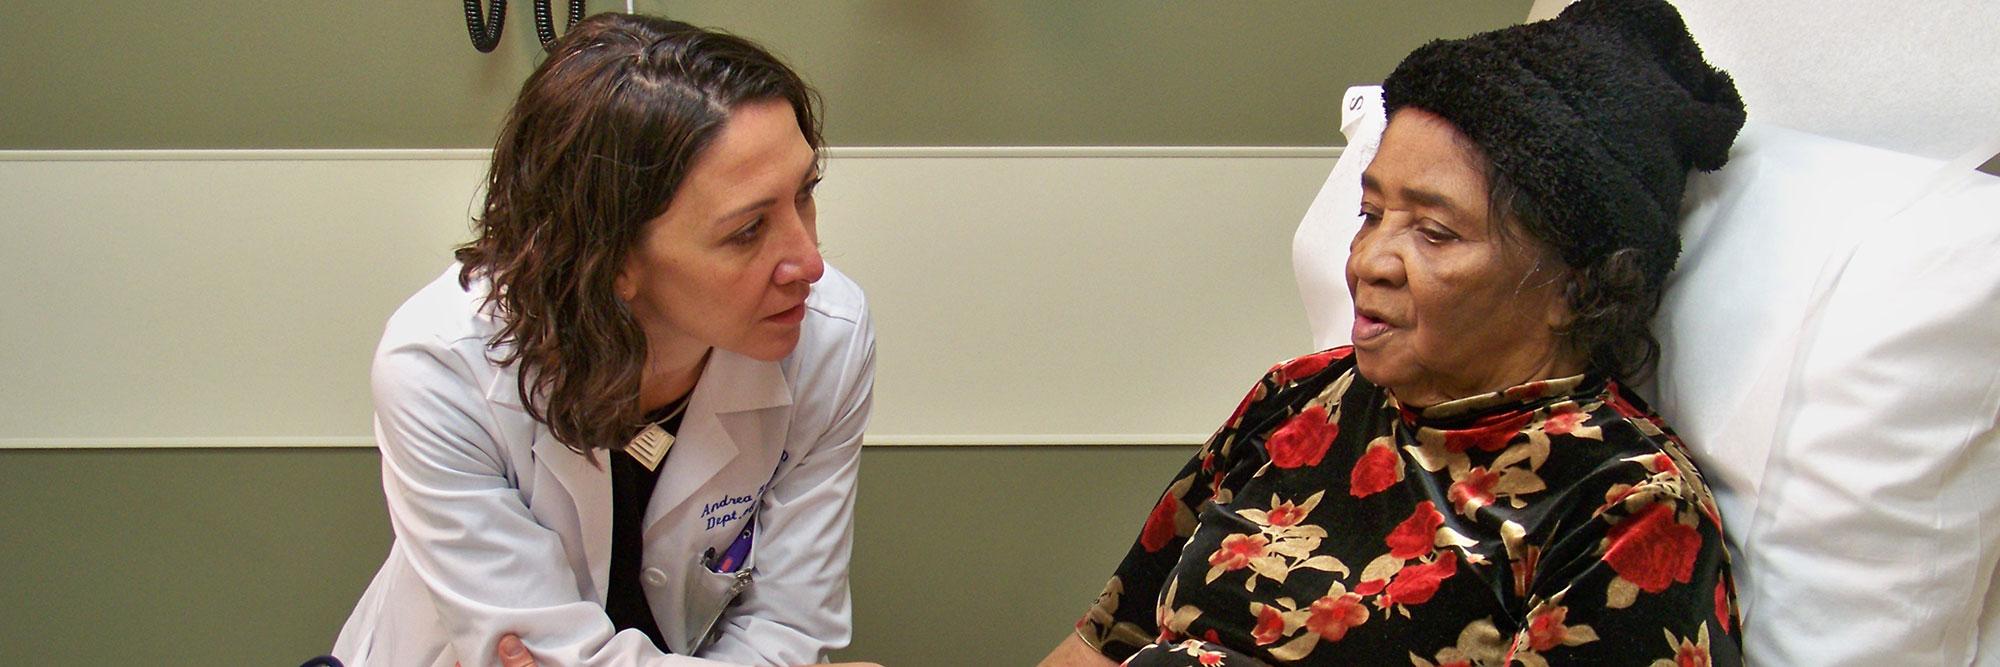 Doctor in discussion with patient